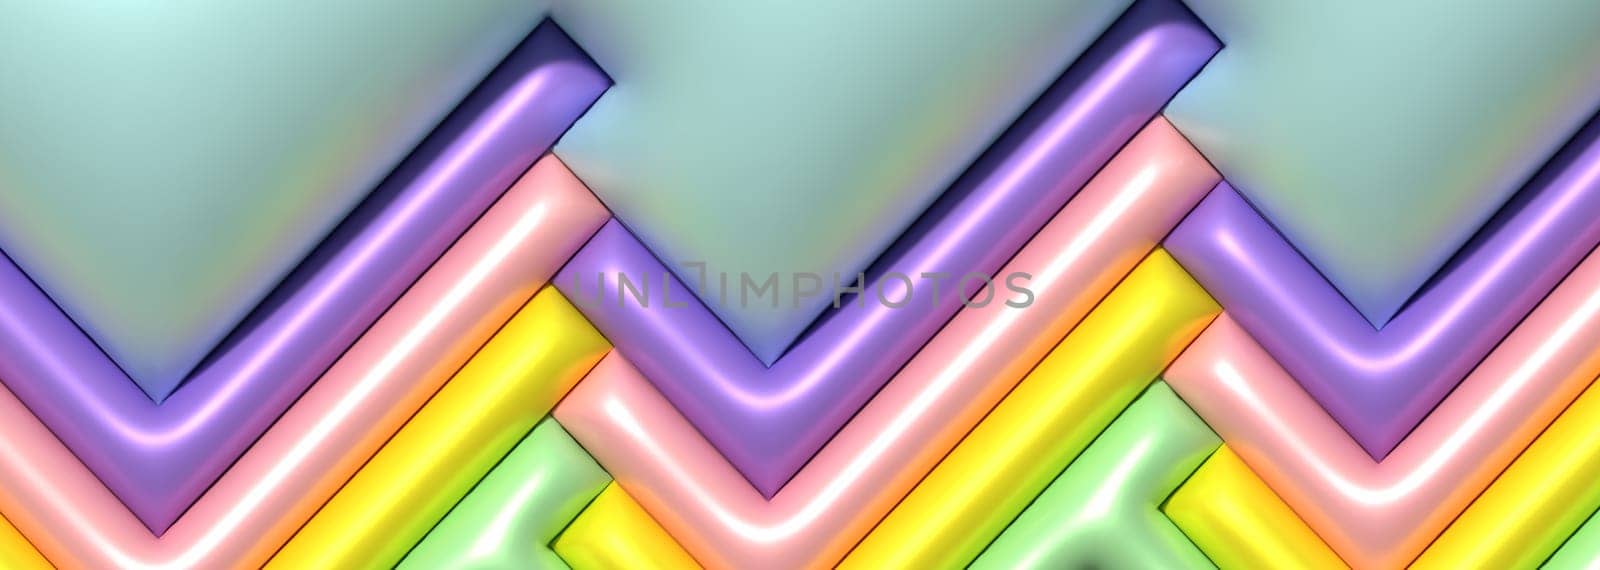 Background with inflated shapes, 3D rendering illustration by ndanko